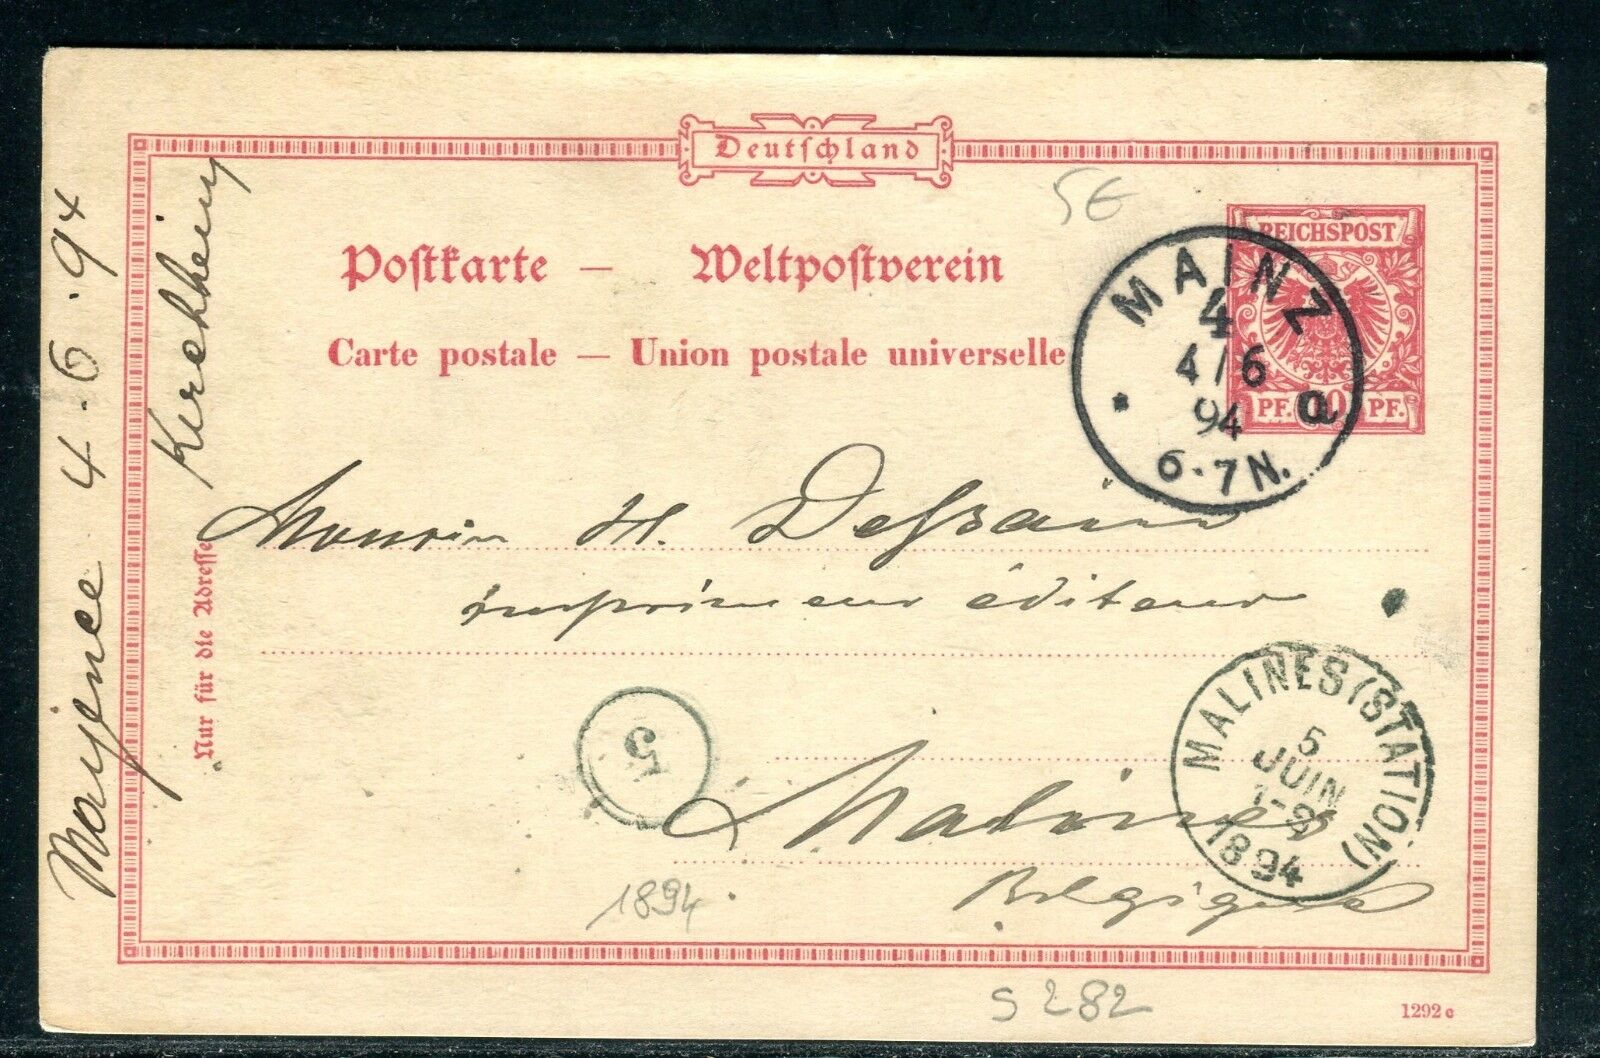 Germany - Mainz Postal Entire for Belgium in 1894